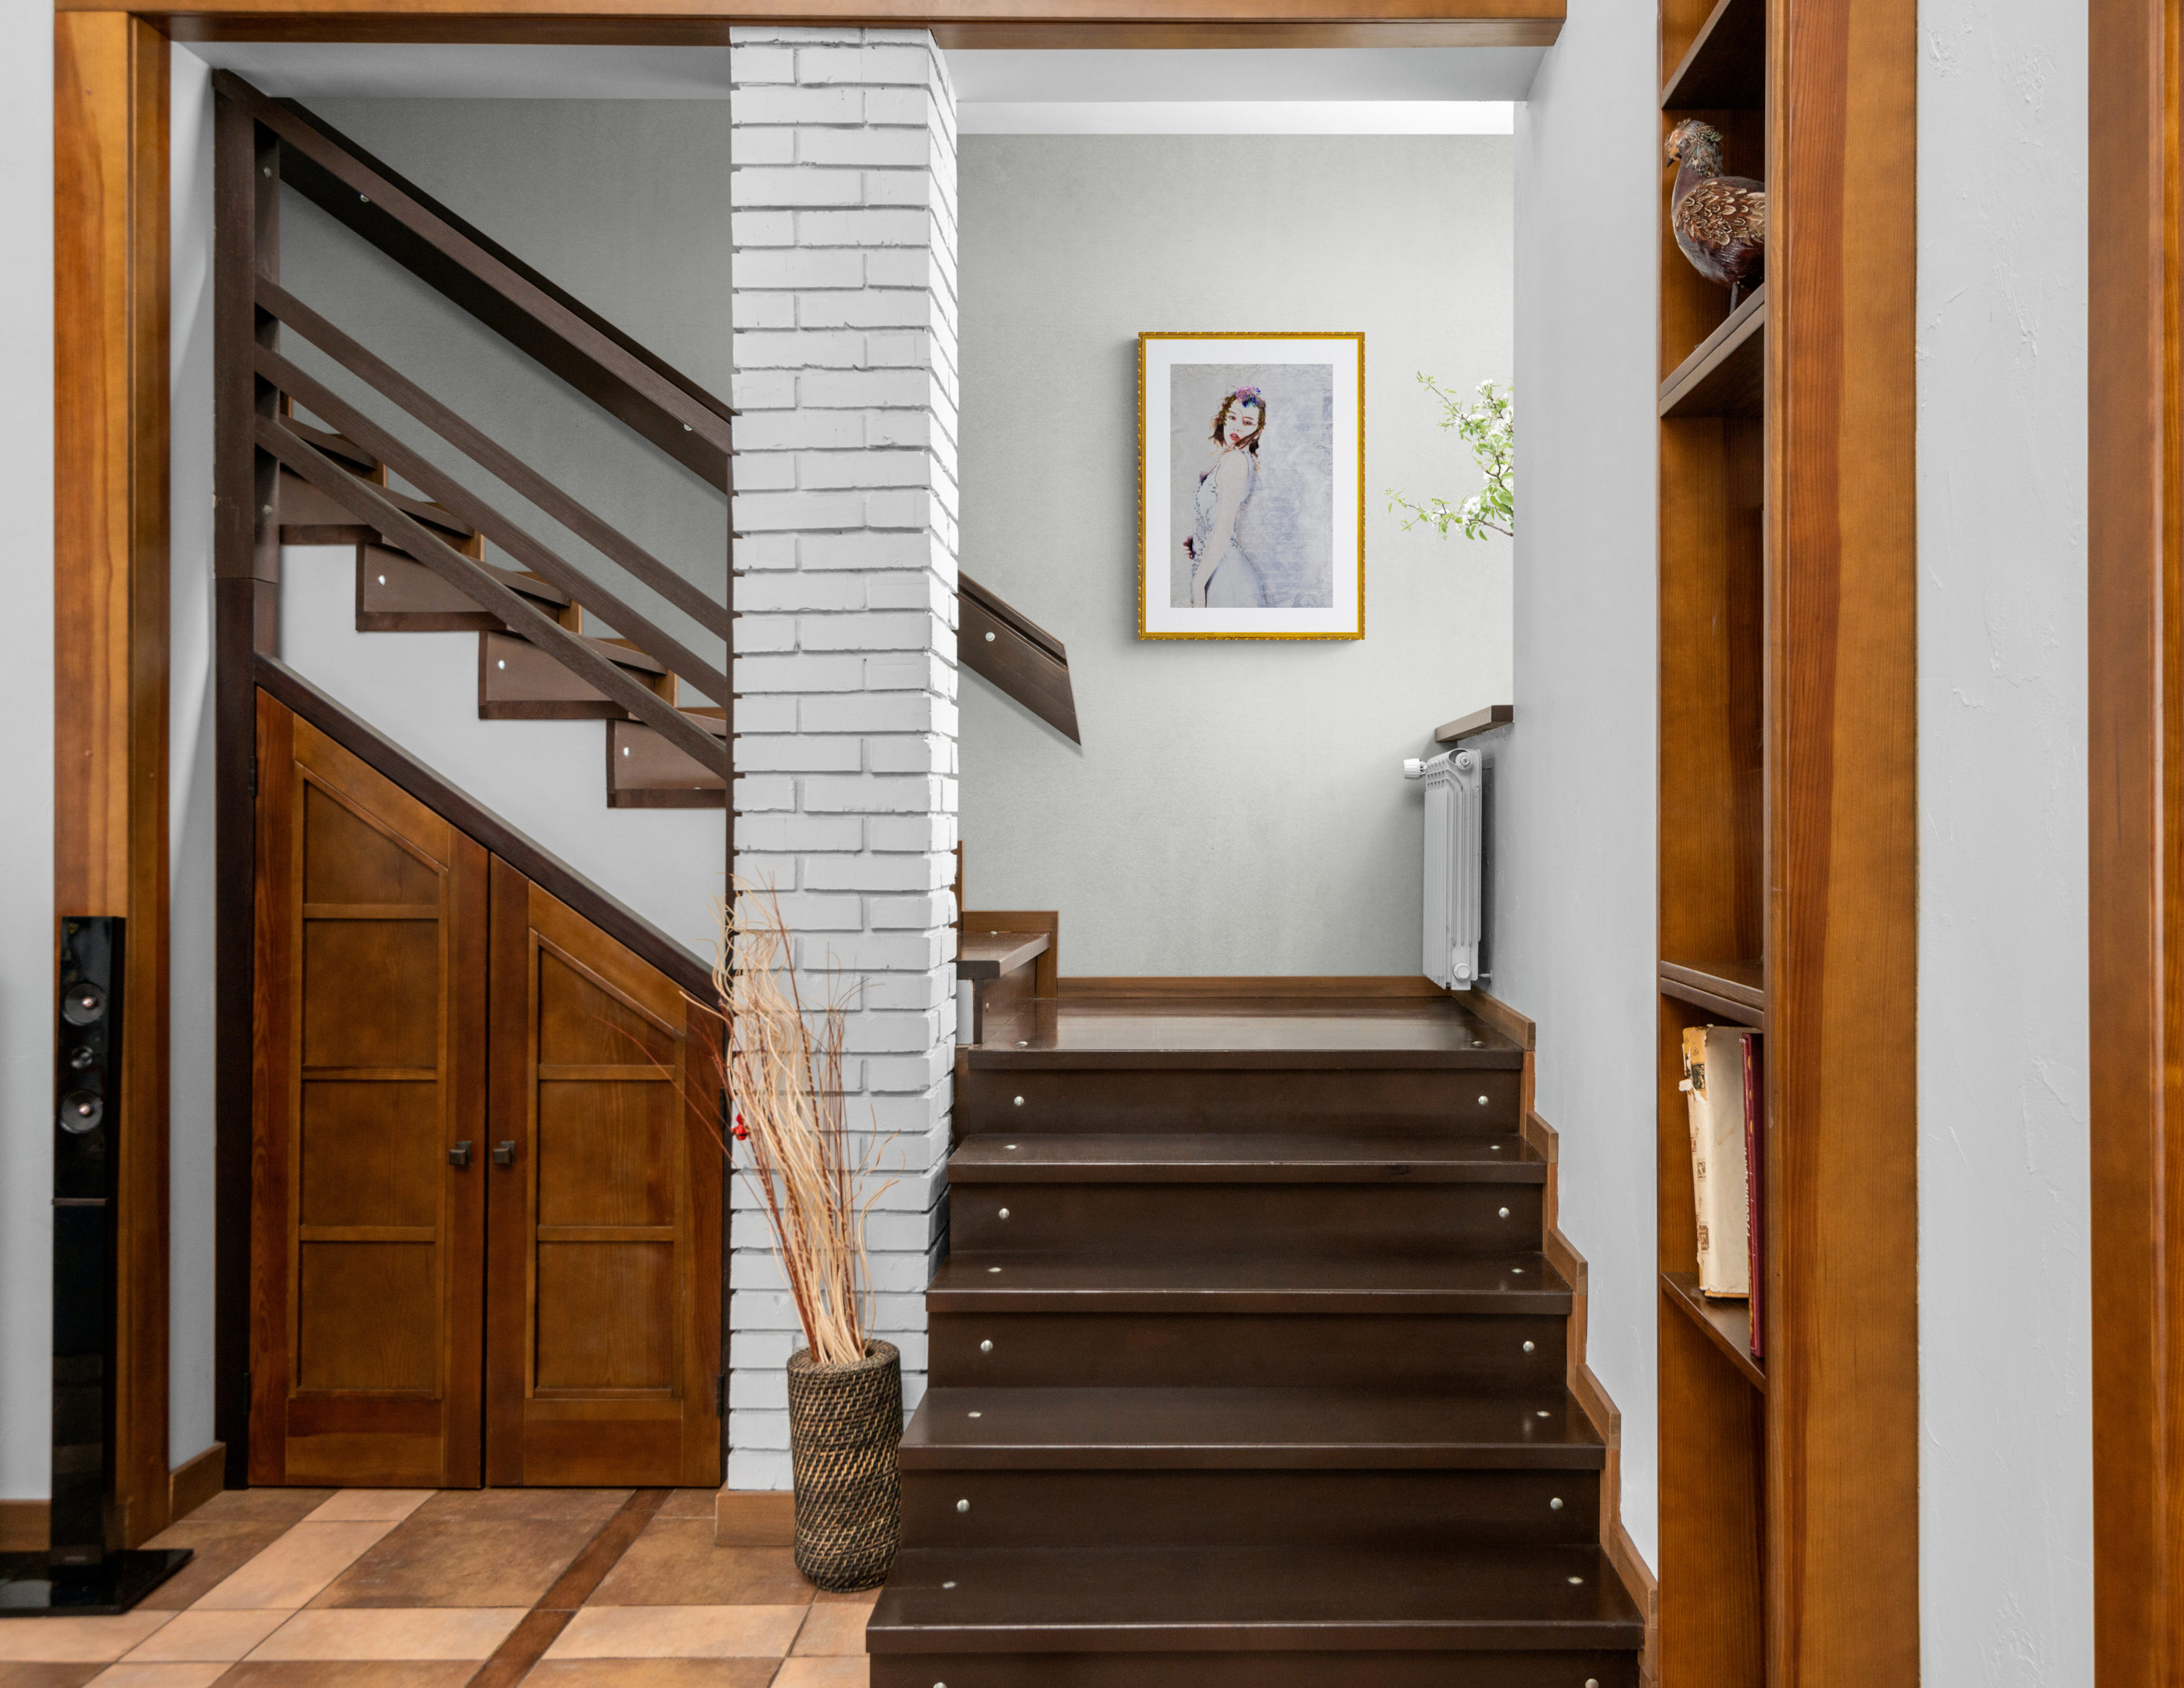 Rustic entry stairway with white walls hanging "And Words Can" by Helen Anne Lemke